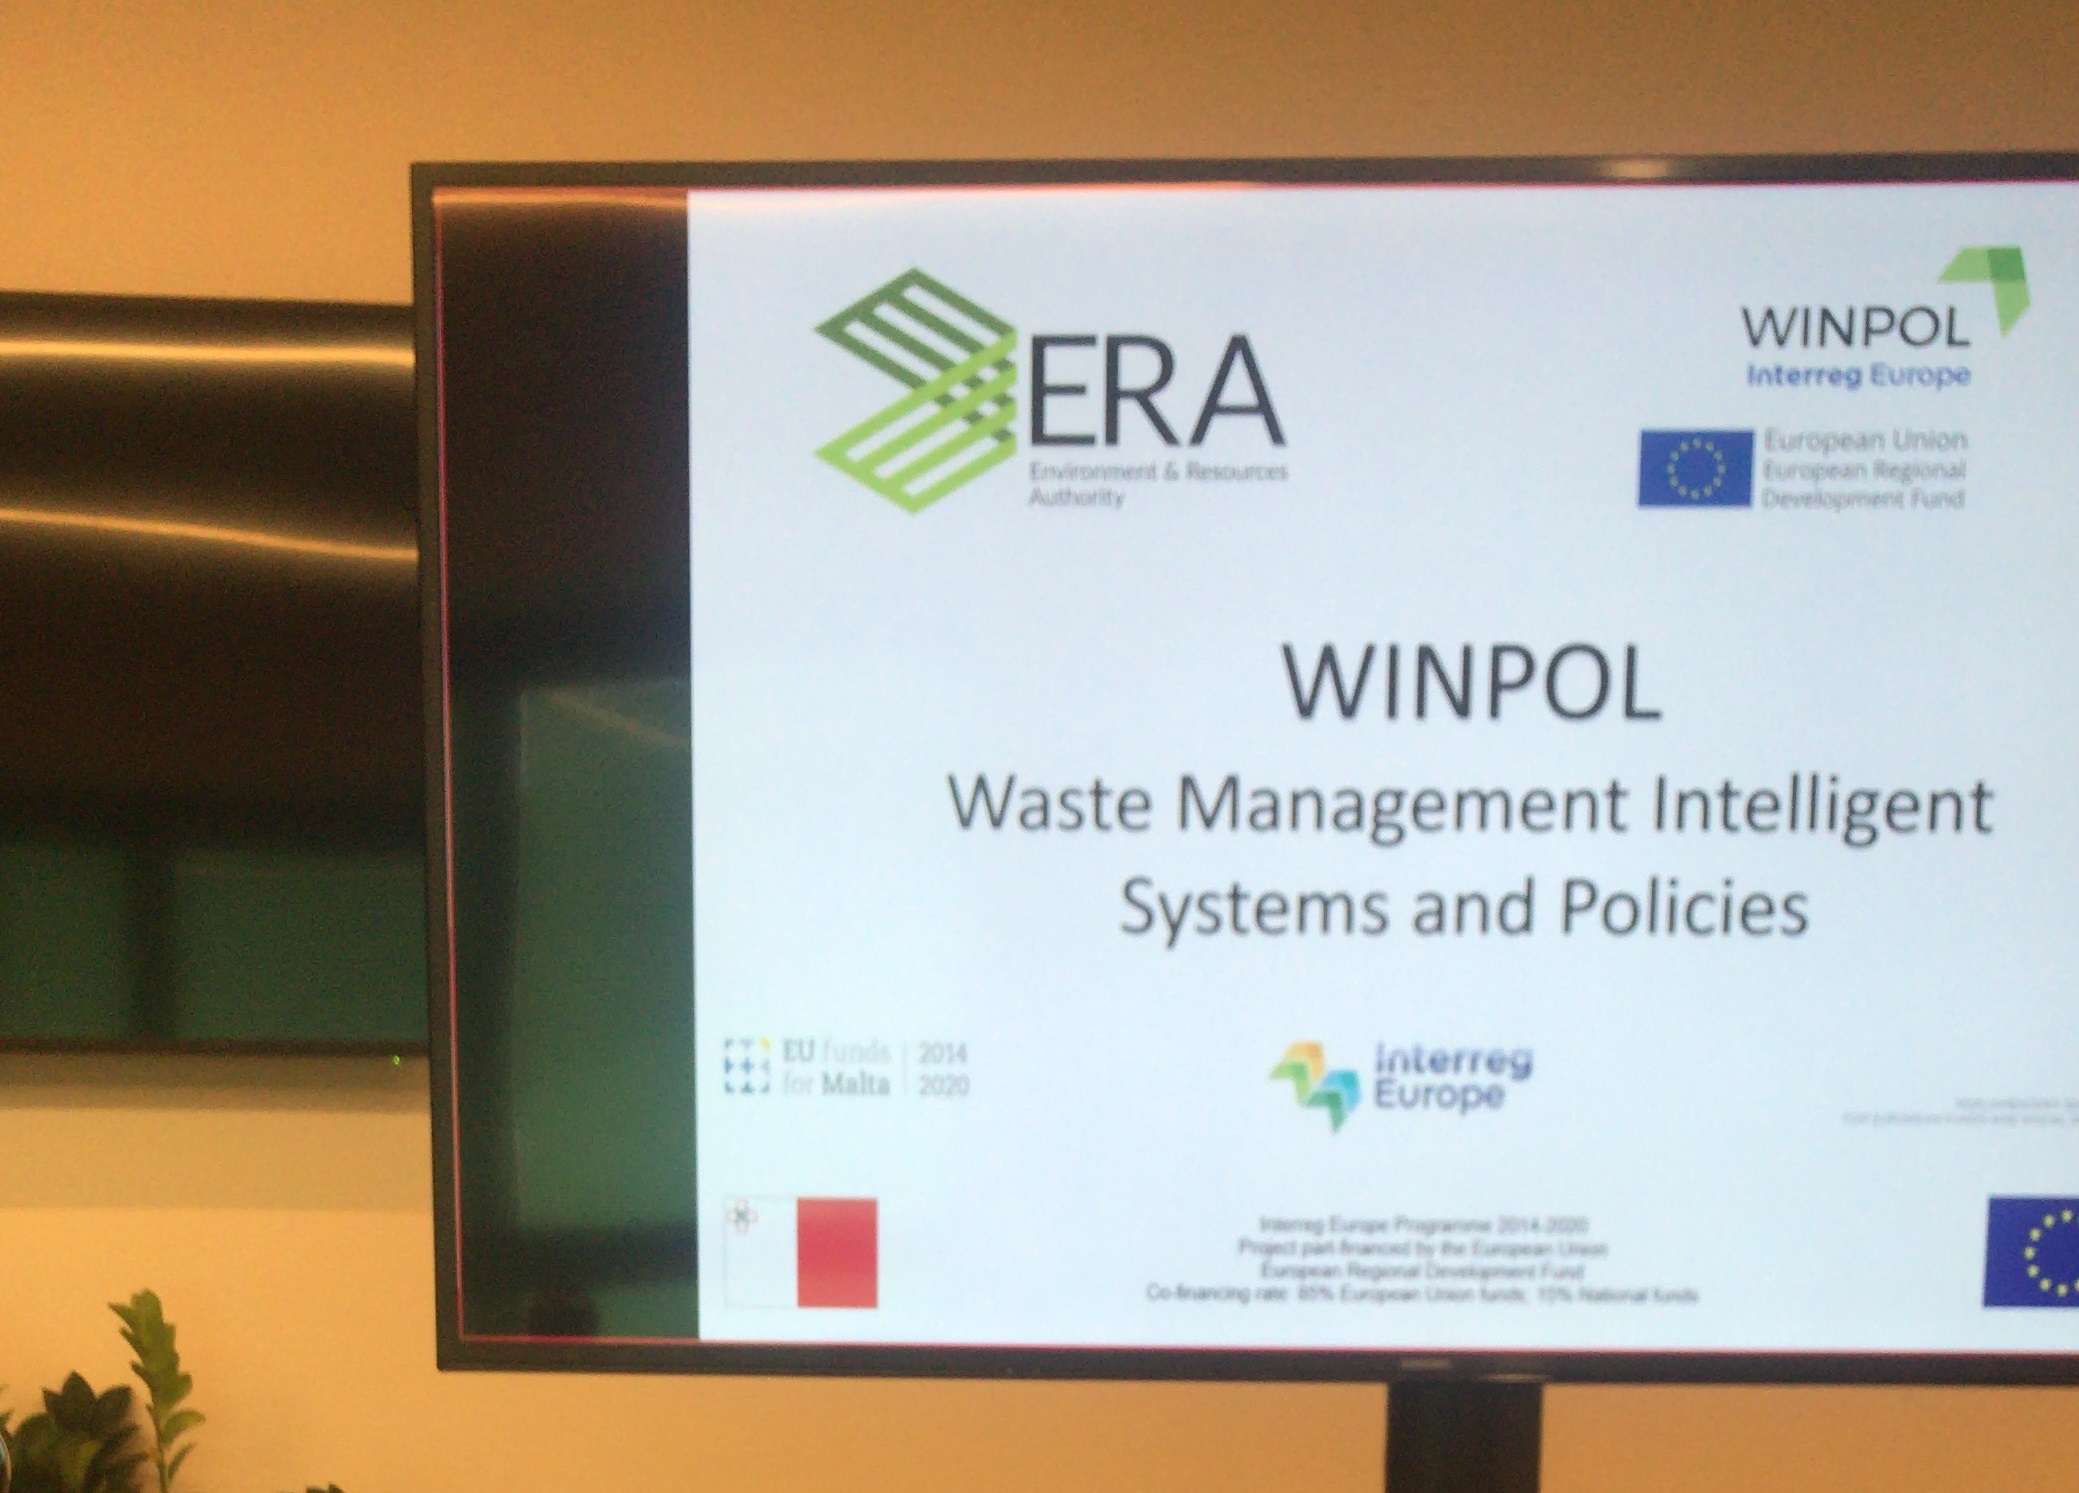 Maltese SMEs learn about WINPOL